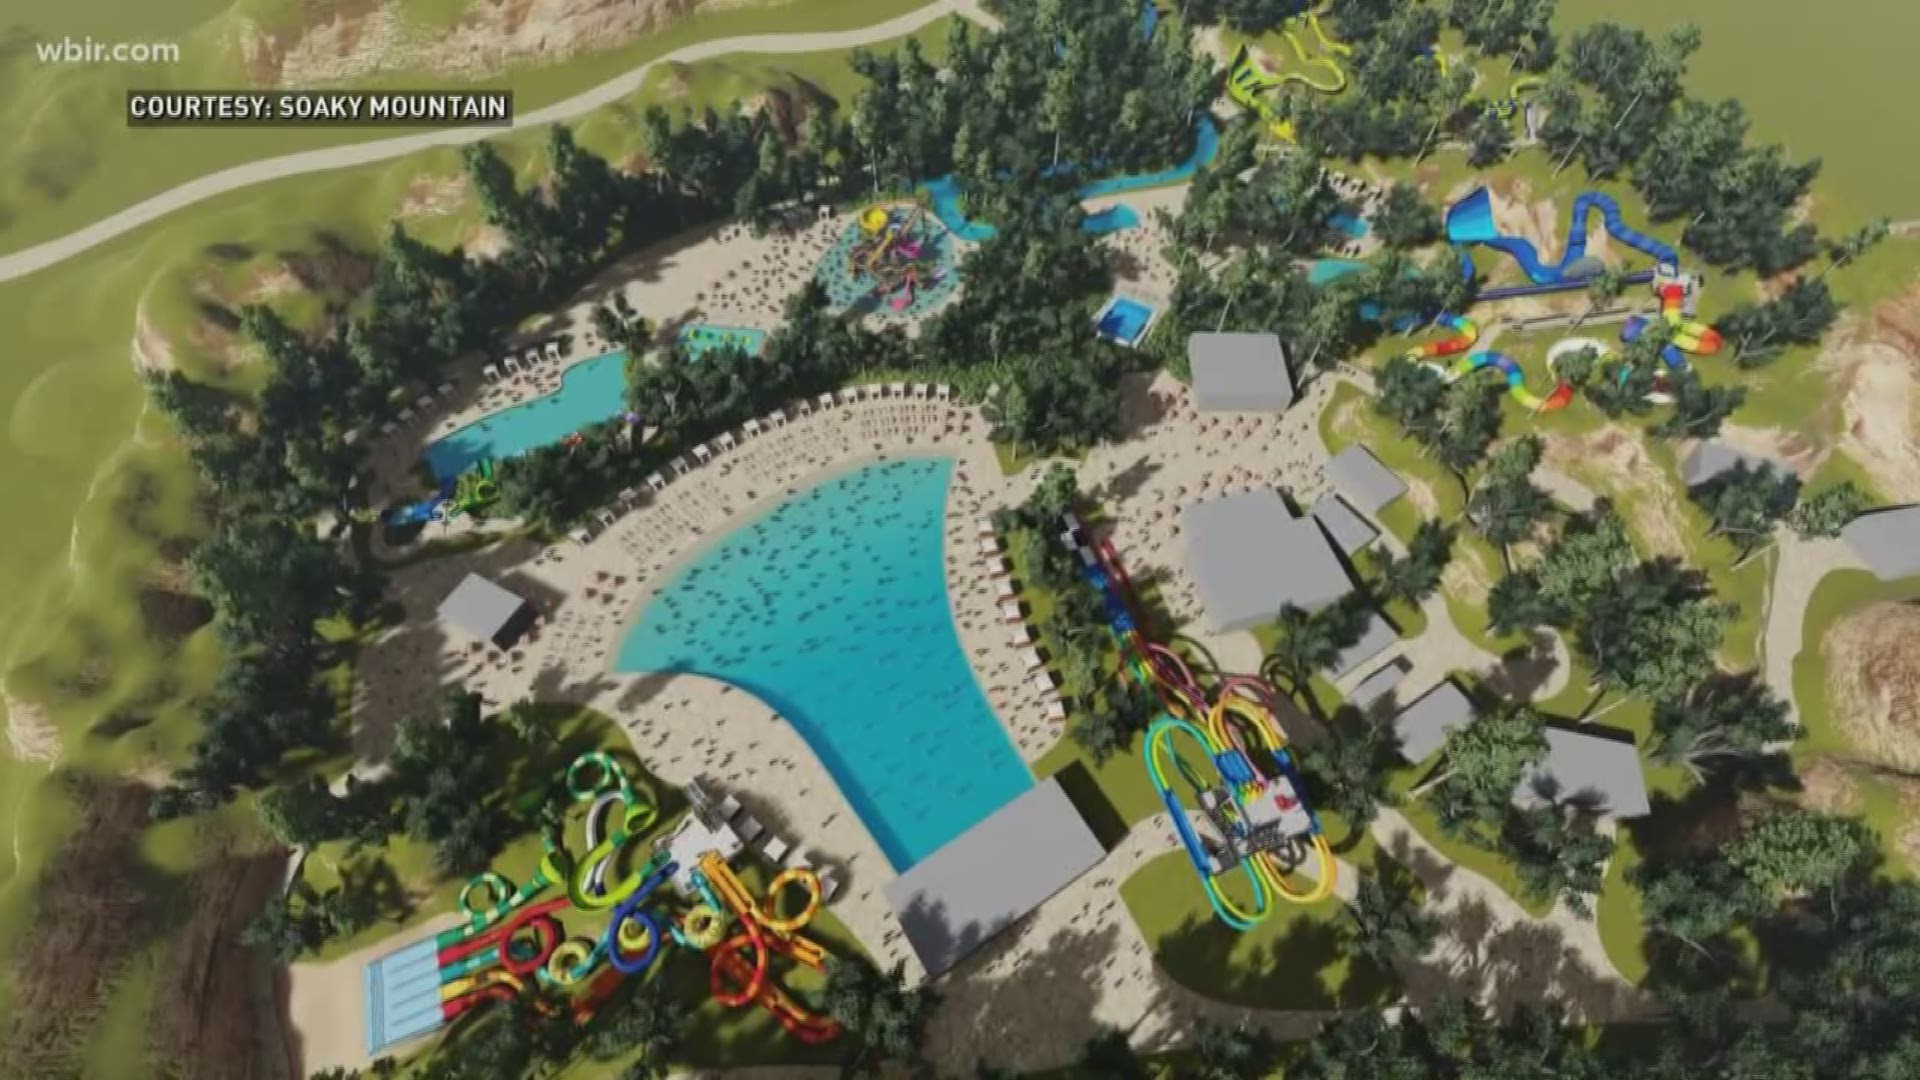 Plans to build a large new waterpark in Sevier County are running into financial trouble.